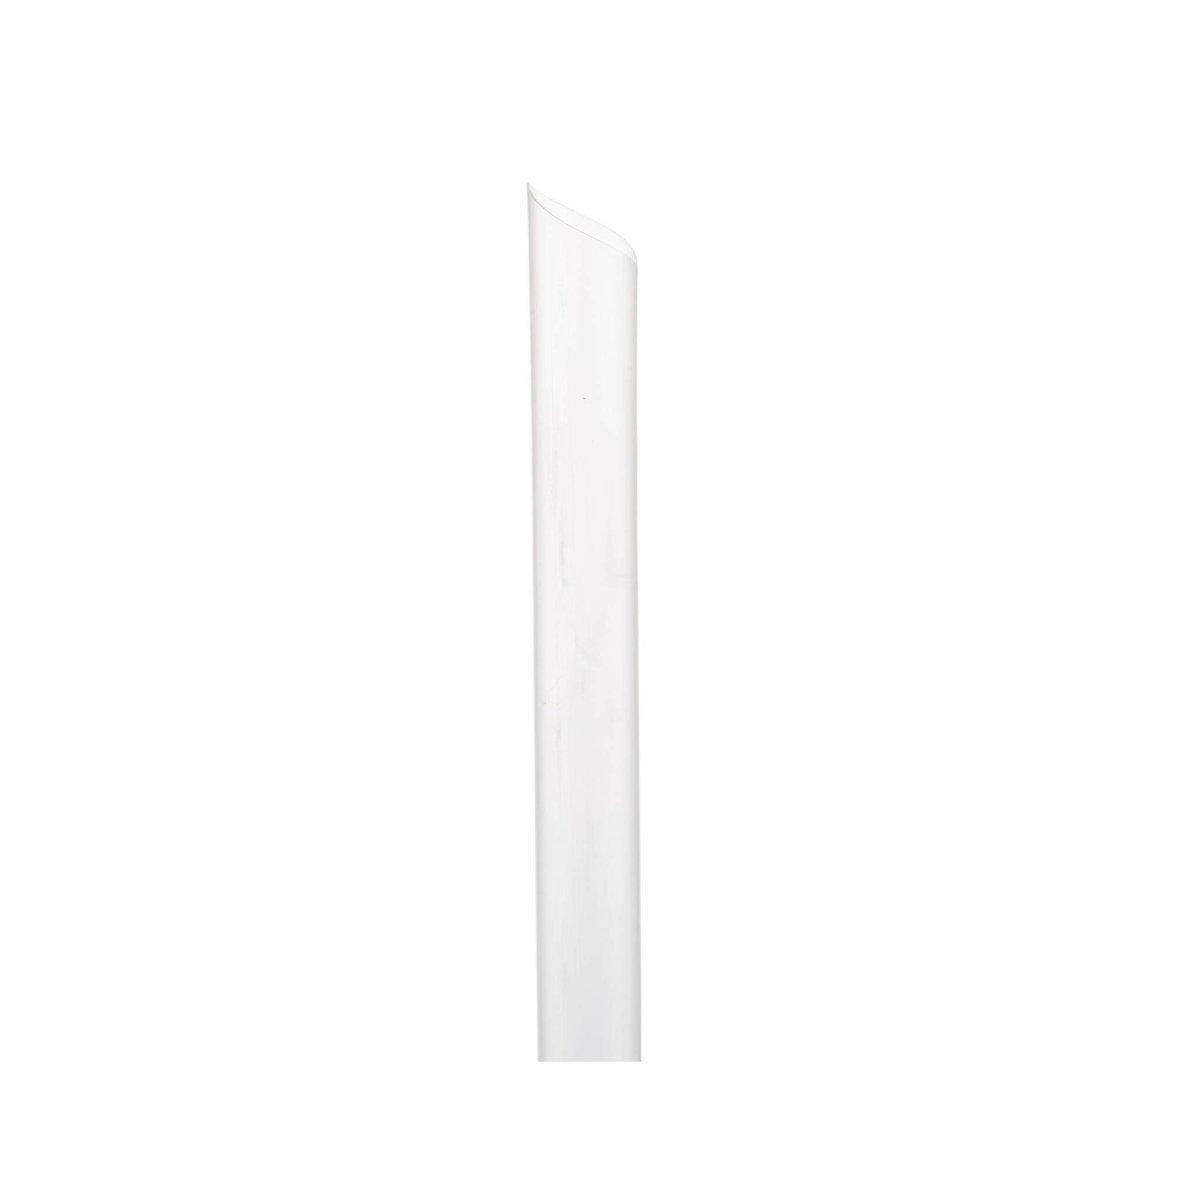 12mm Clear Straight Straw Clear Wrap 100 Pieces X 24 Packet - hotpackwebstore.com - Plastic Straws